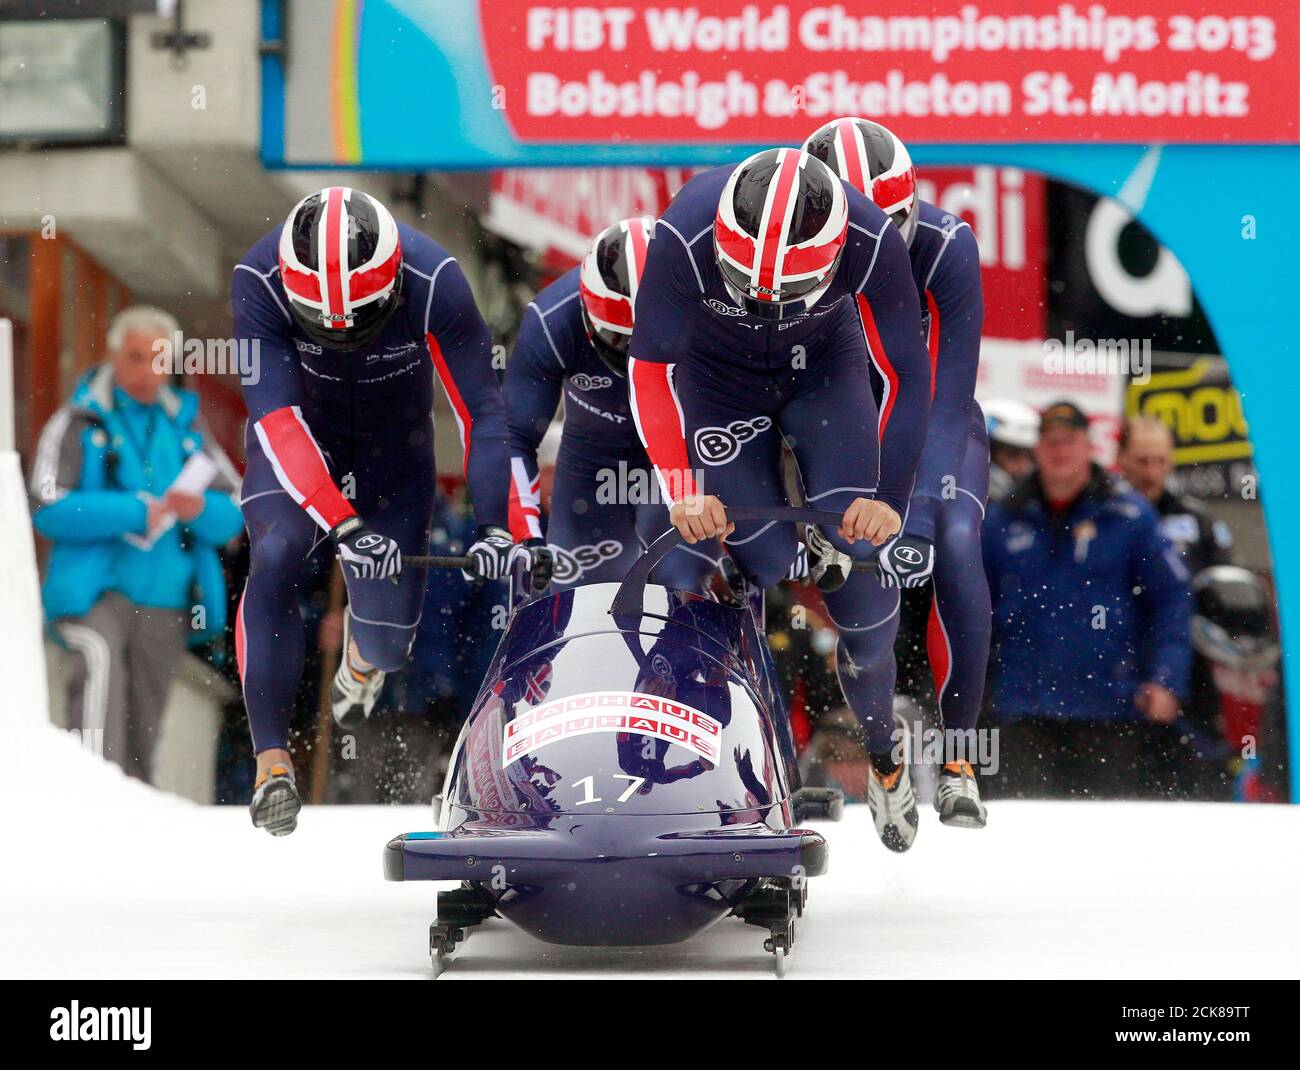 Britain's team pilot John James Jackson (front), Stuart Benson, Bruce Tasker  and Joel Fearon start on the natural ice track during the first run of the  4-men competition at the FIBT Bobsleigh